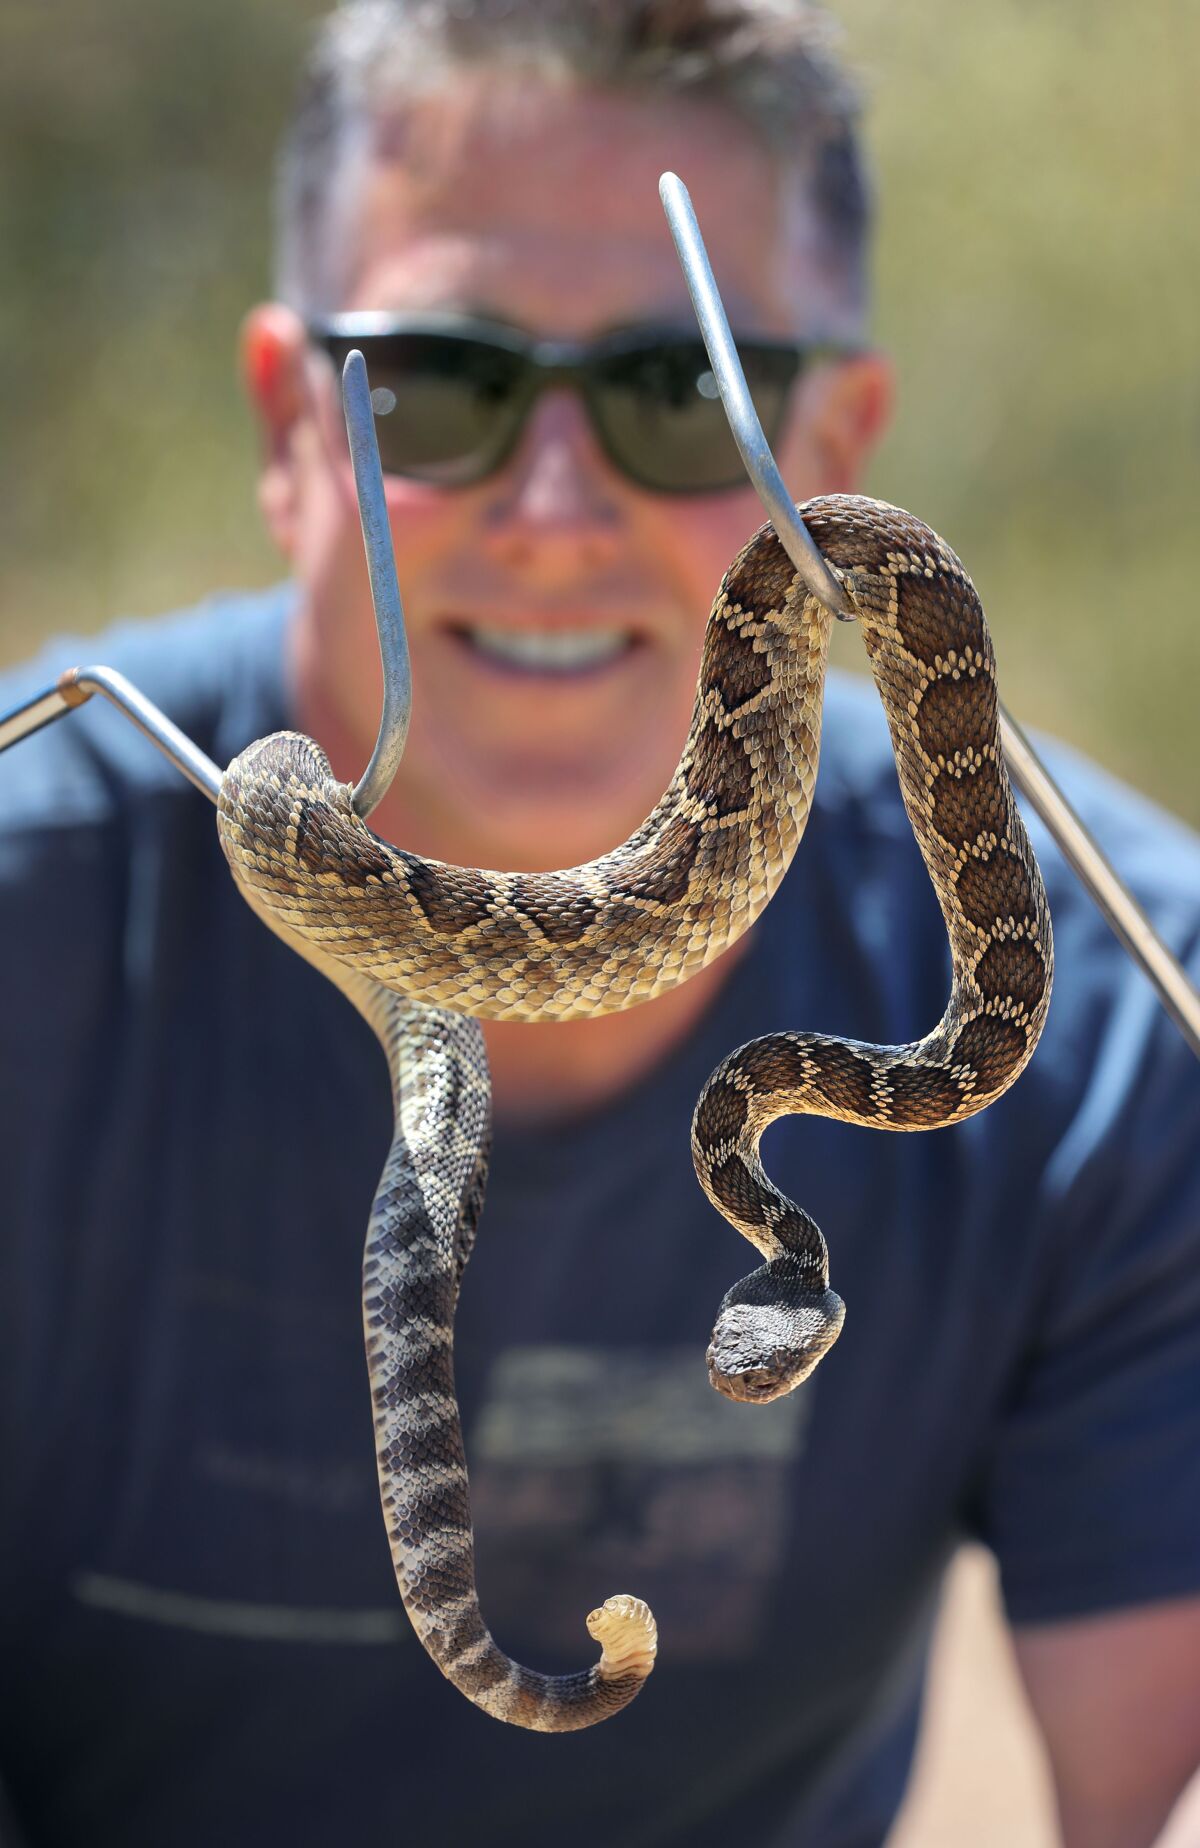 Snake wrangler Bruce Ireland prepares to release a Southern Pacific Rattlesnake he recently removed from a caller's yard.